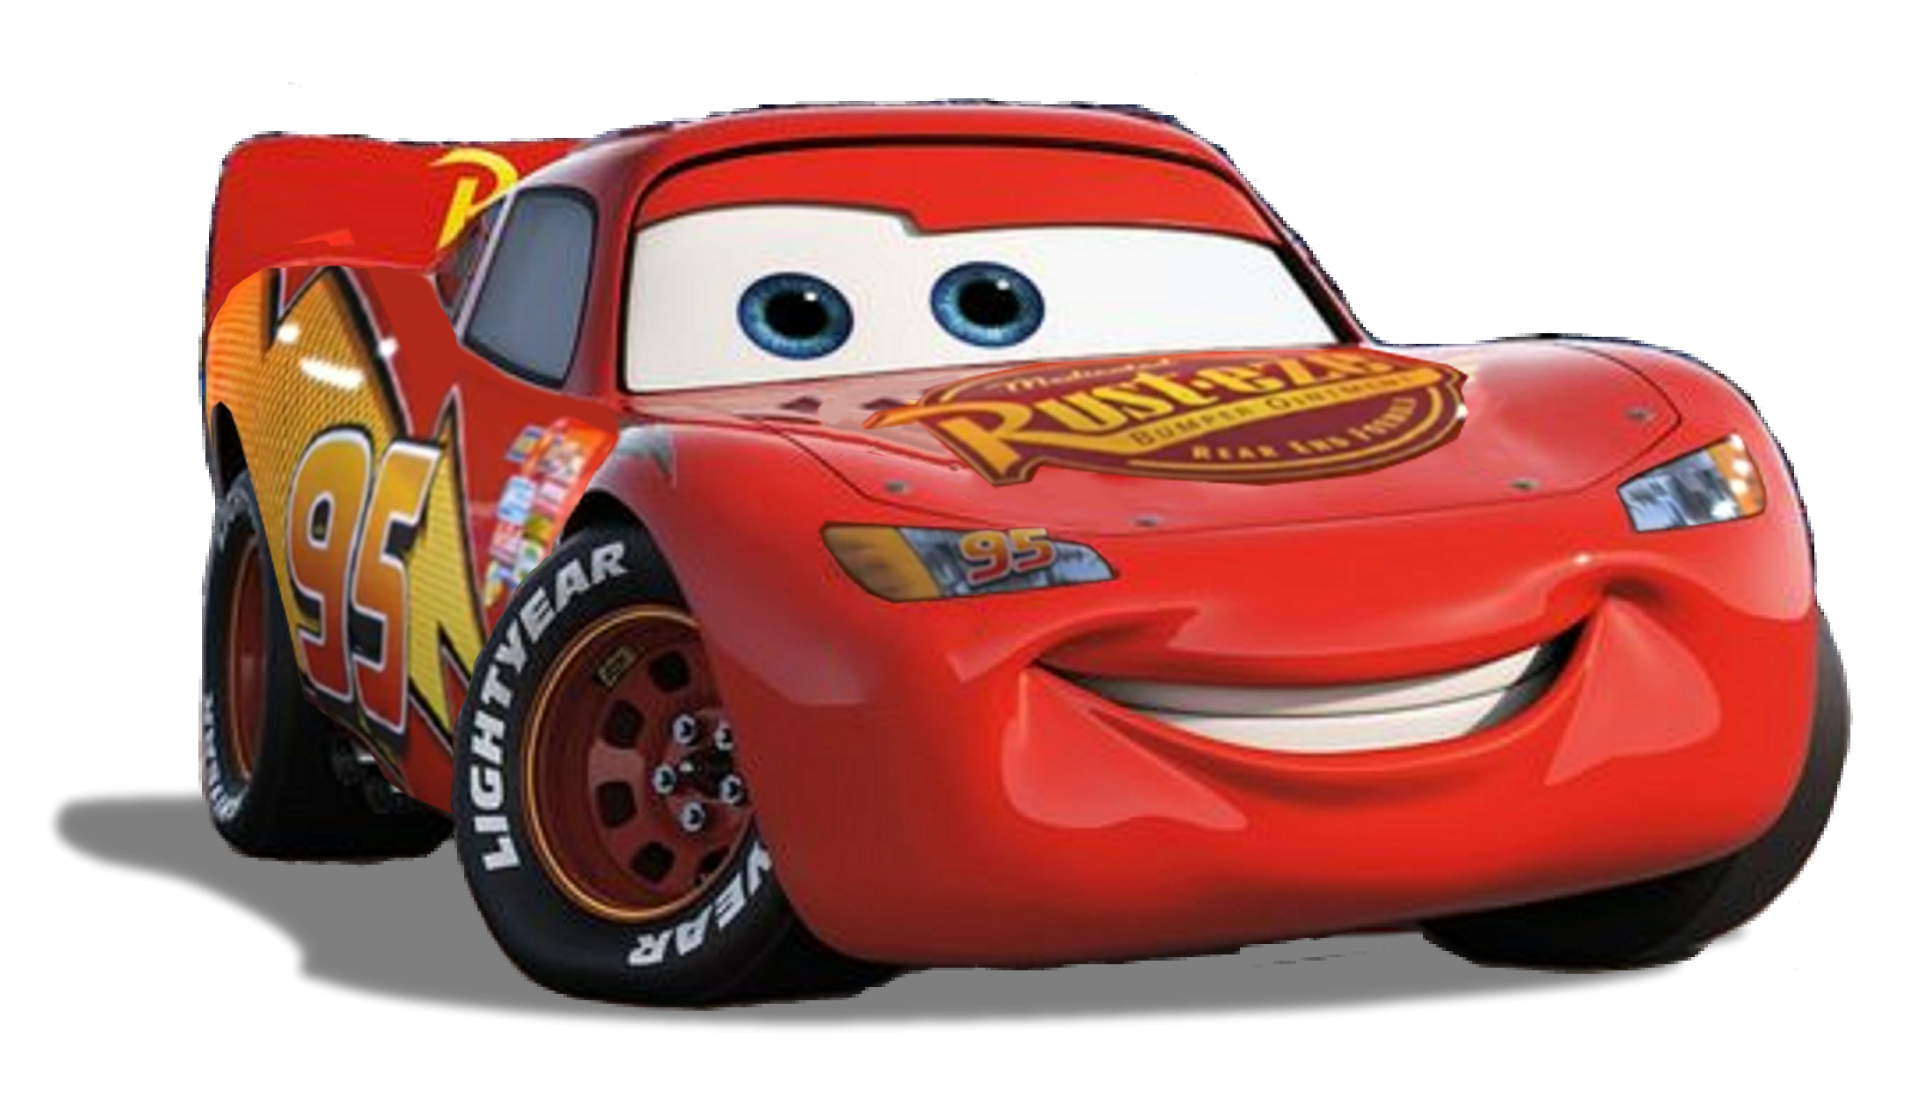 cars5 cars1 cars2 cars3 cars4 sticker by @emq95oficialyt